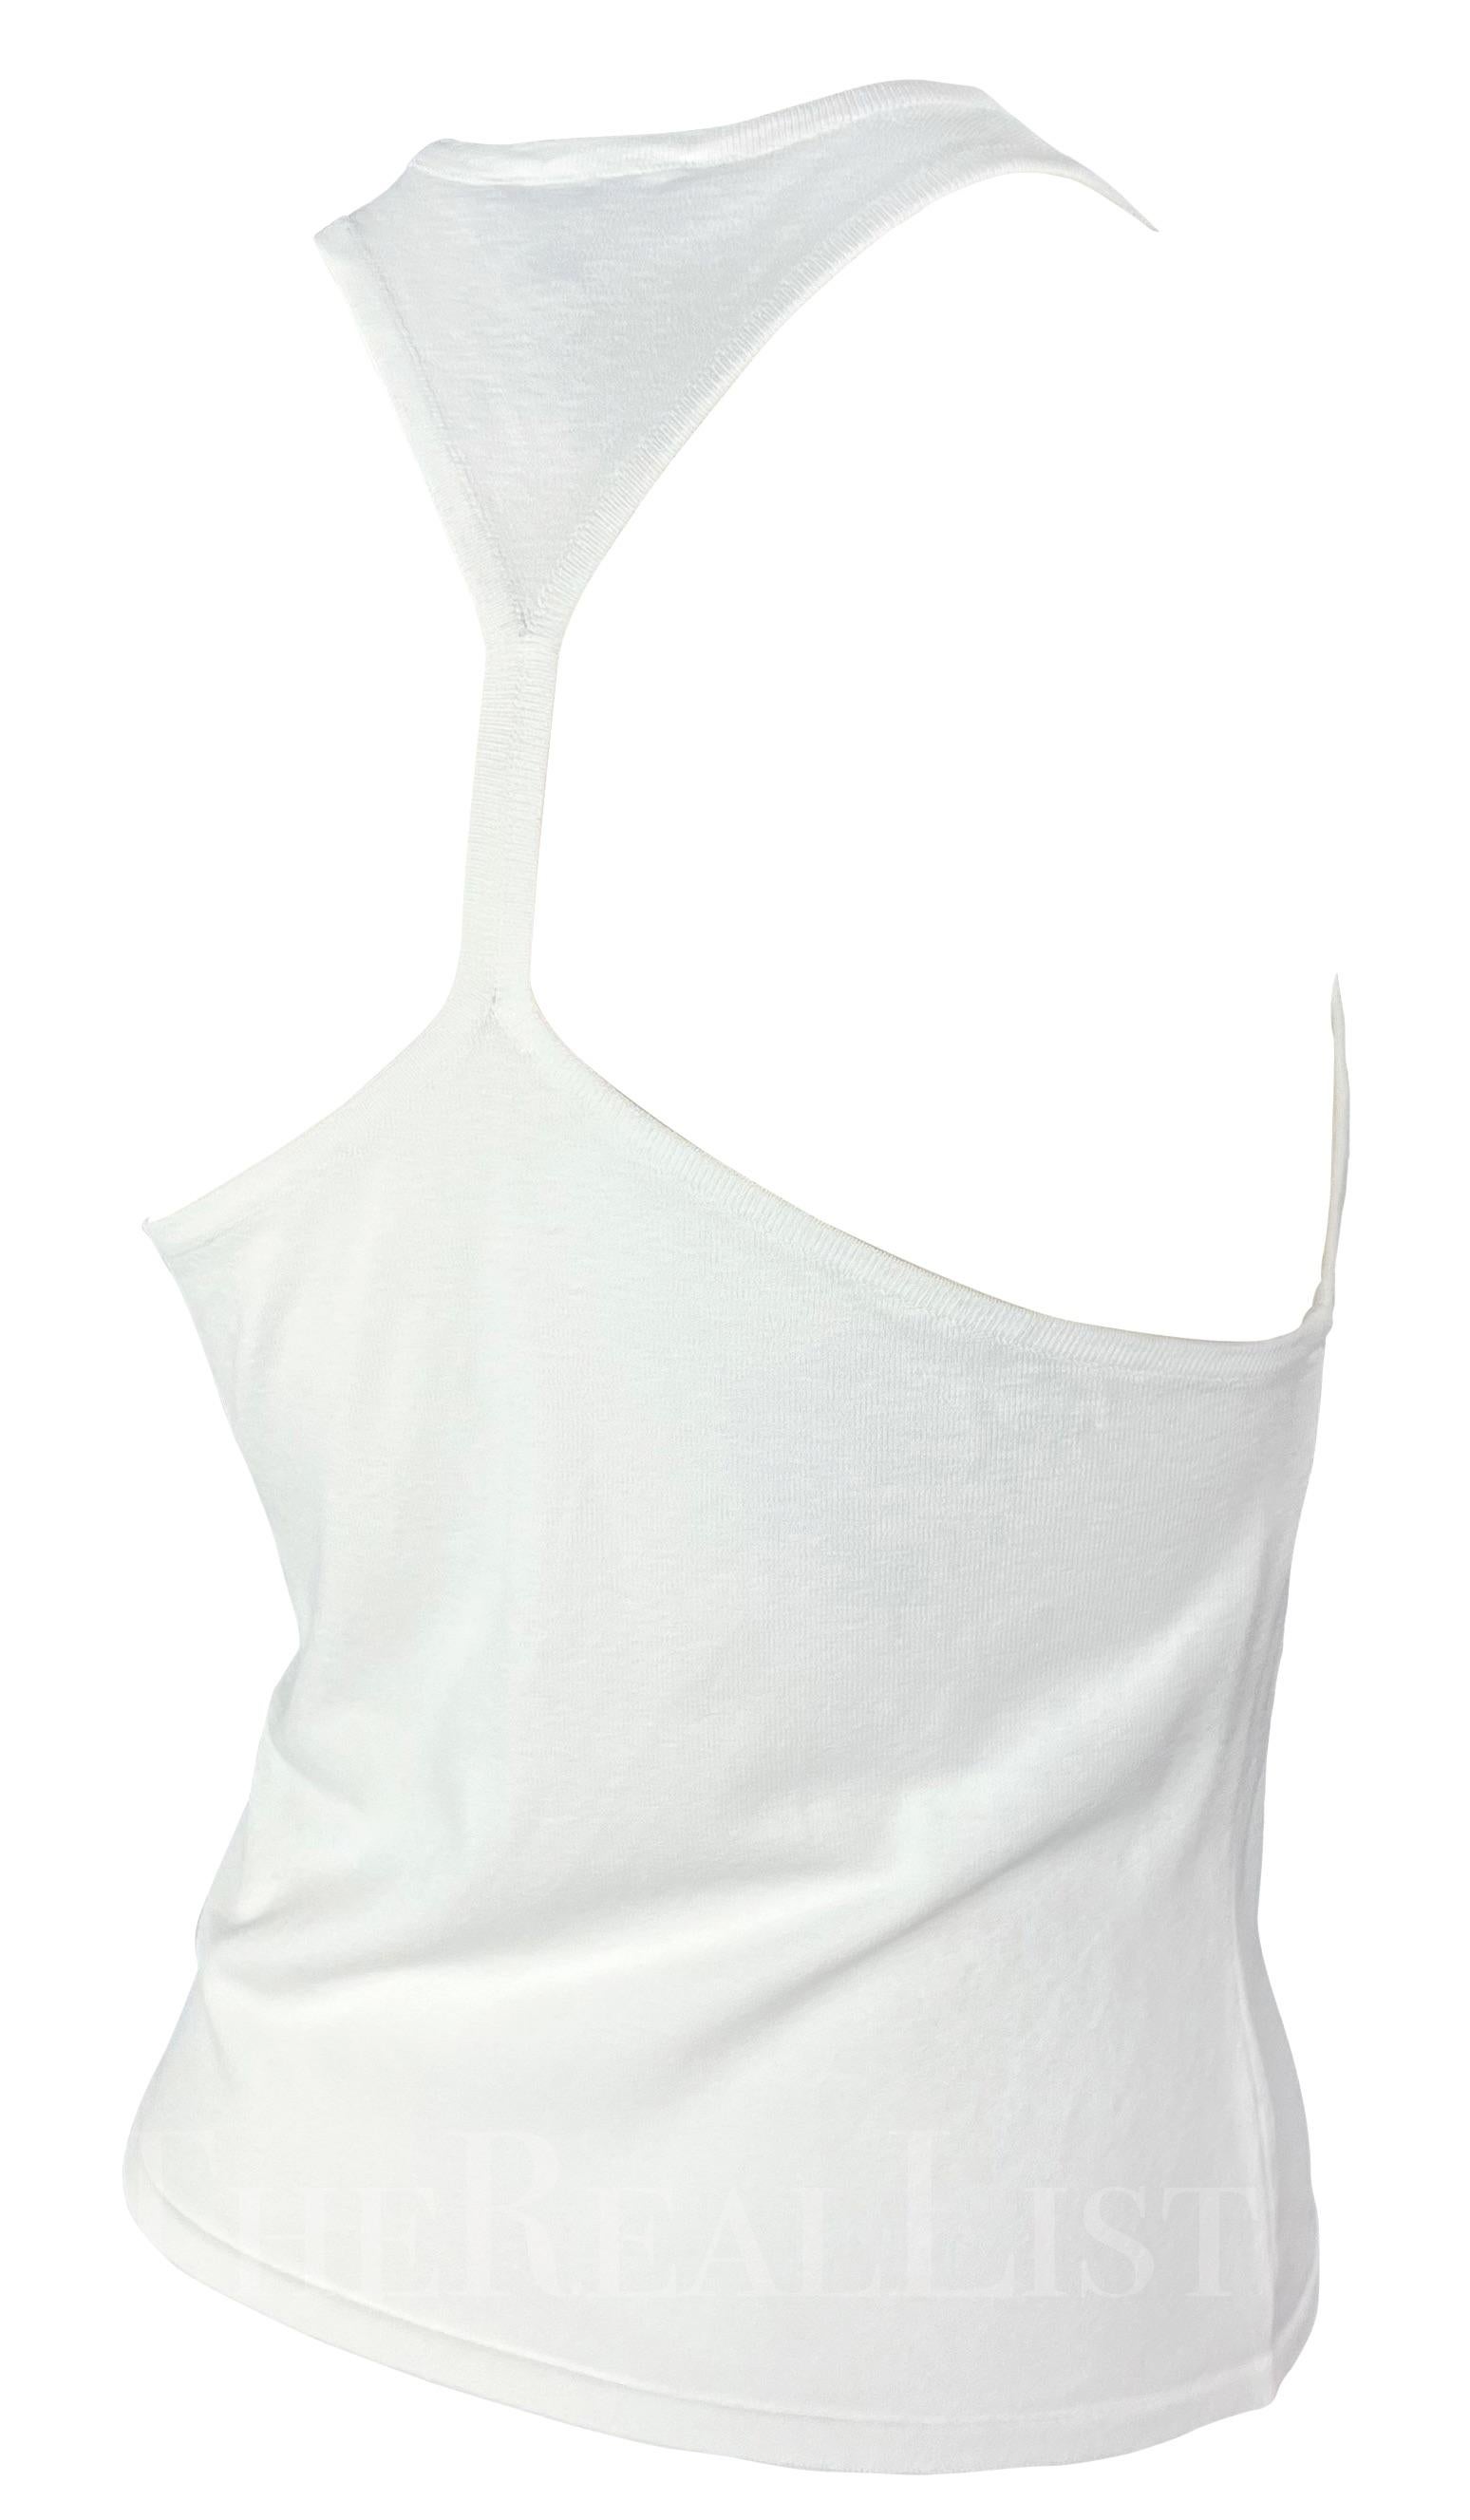 Presenting a white Gucci tank top, designed by Tom Ford. From the Spring/Summer 1998 collection, this top features a high v-neck and a racerback. This fabulous Gucci by Tom Ford top offers a stylishly refined upgrade to an essential